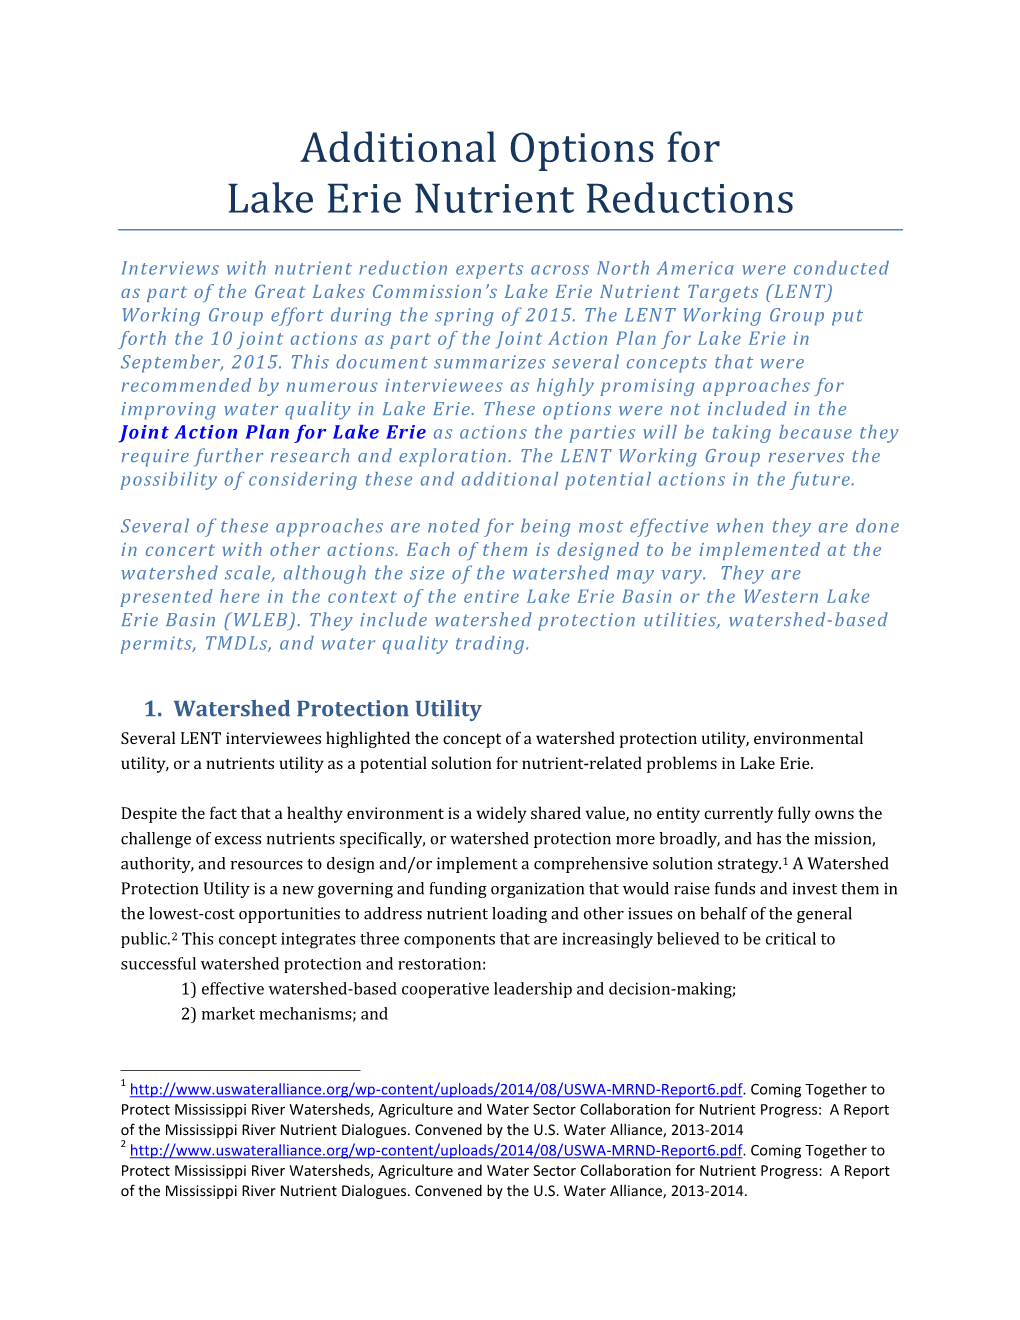 Additional Options for Lake Erie Nutrient Reductions